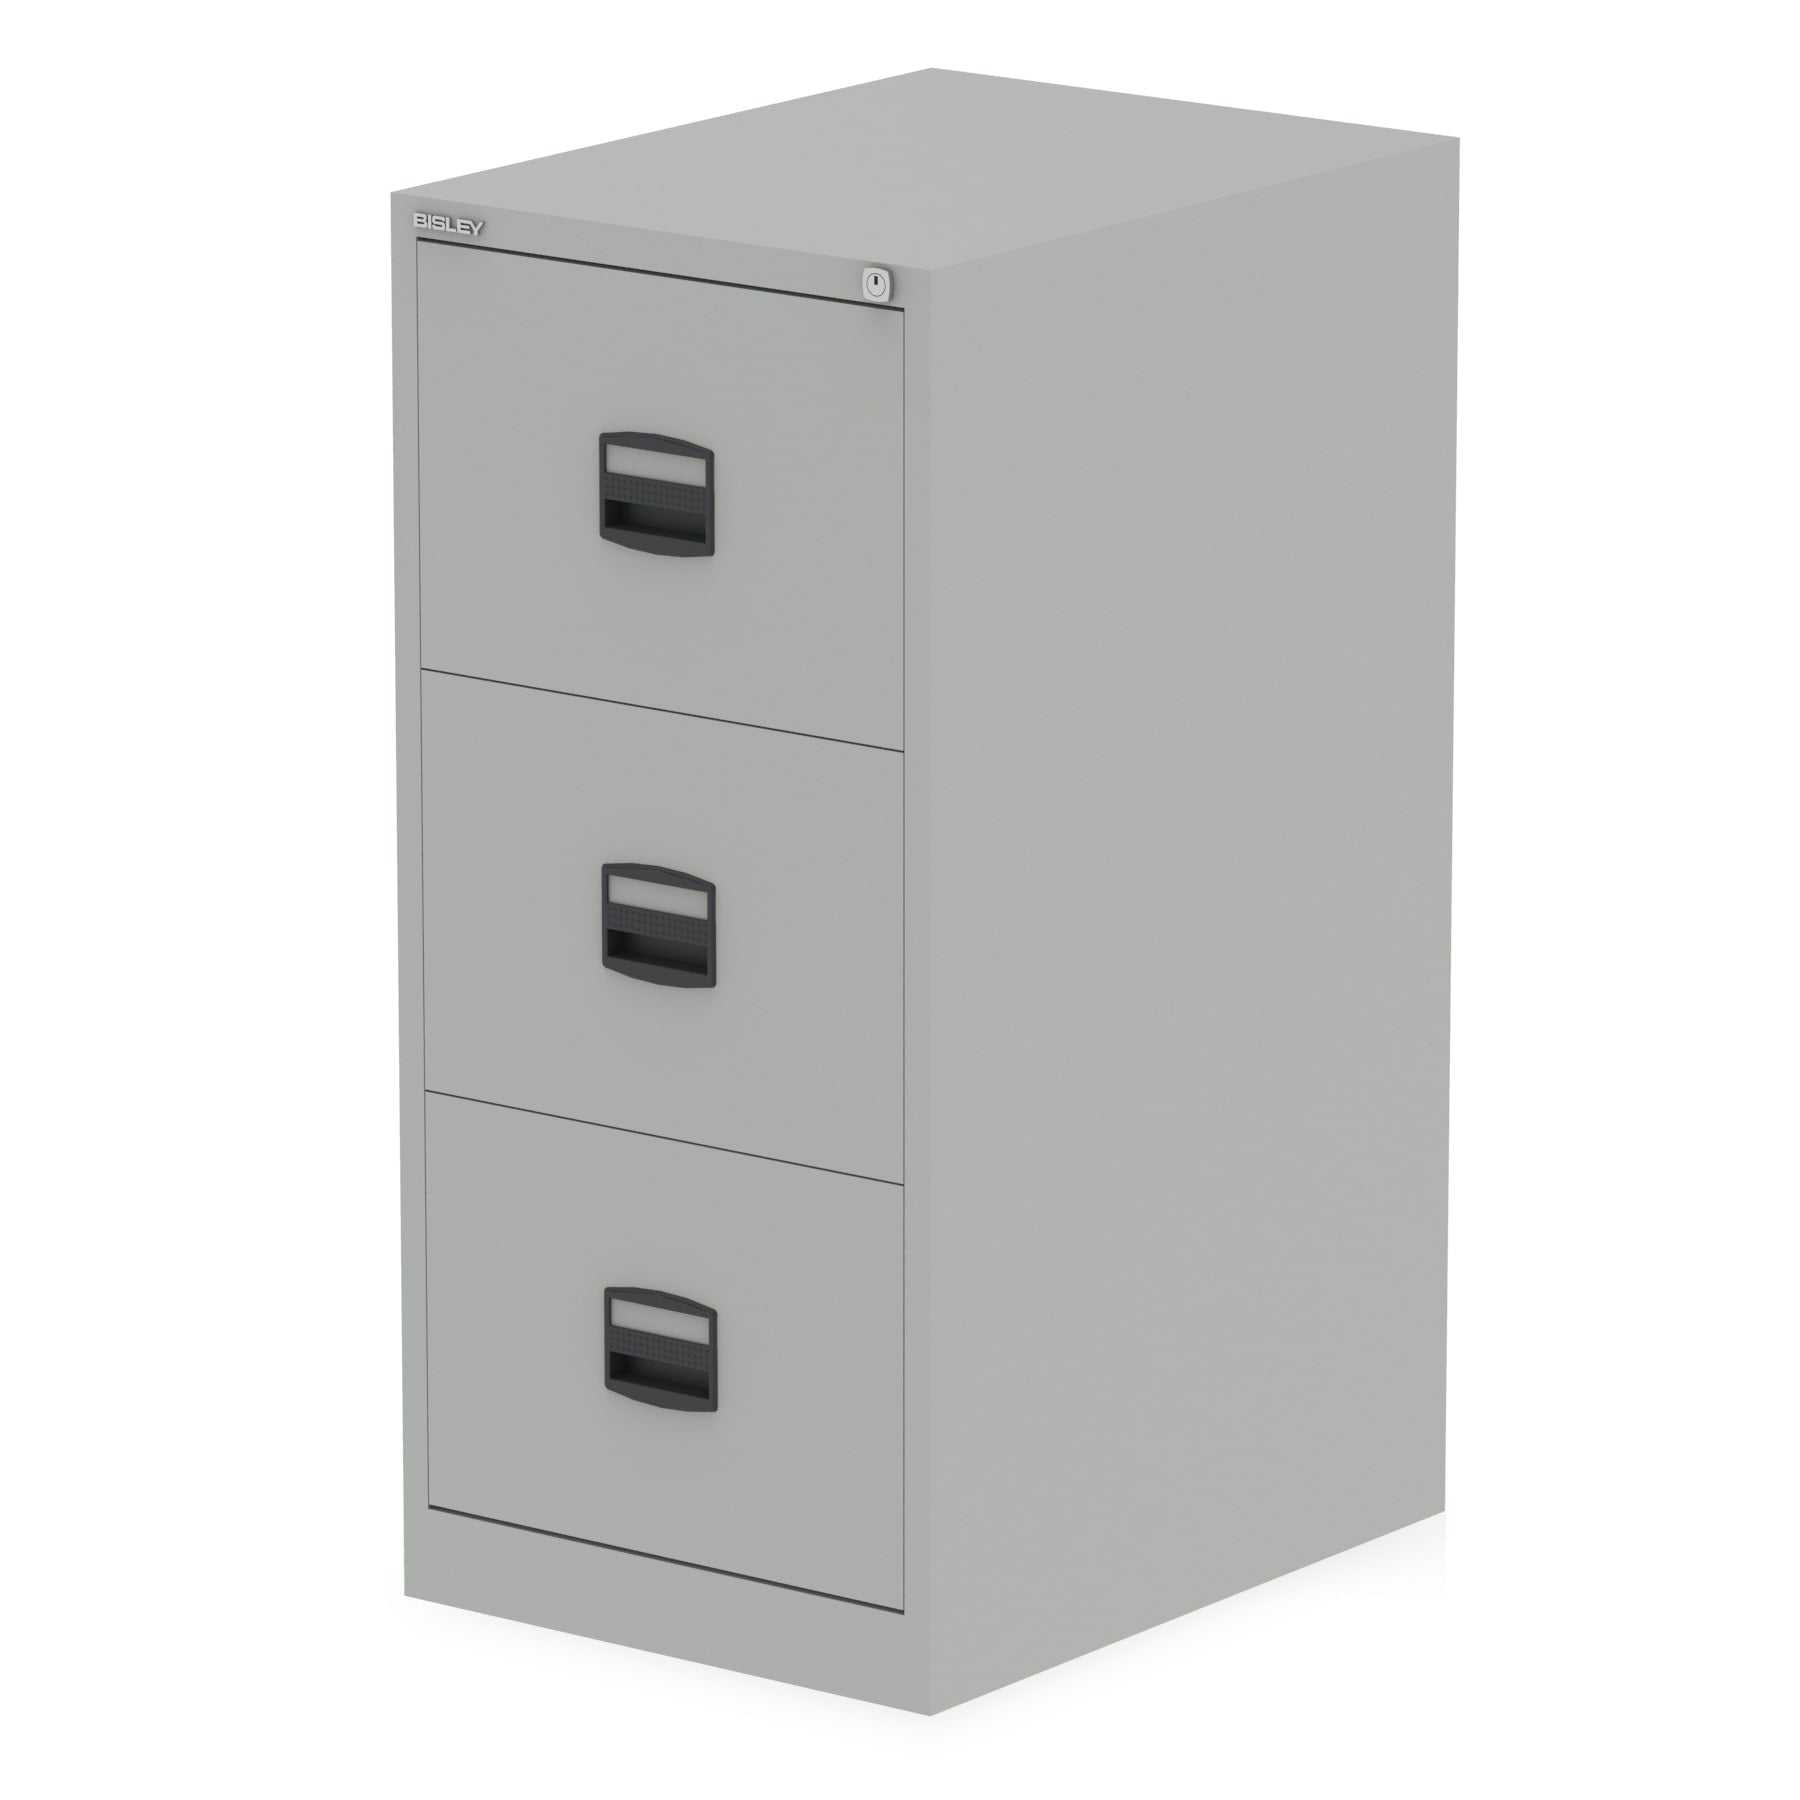 Bisley Qube Steel Filing Cabinet - Lockable Drawers, 2/3/4 Drawer Options, 470x622mm (WxD), 5-Year Guarantee